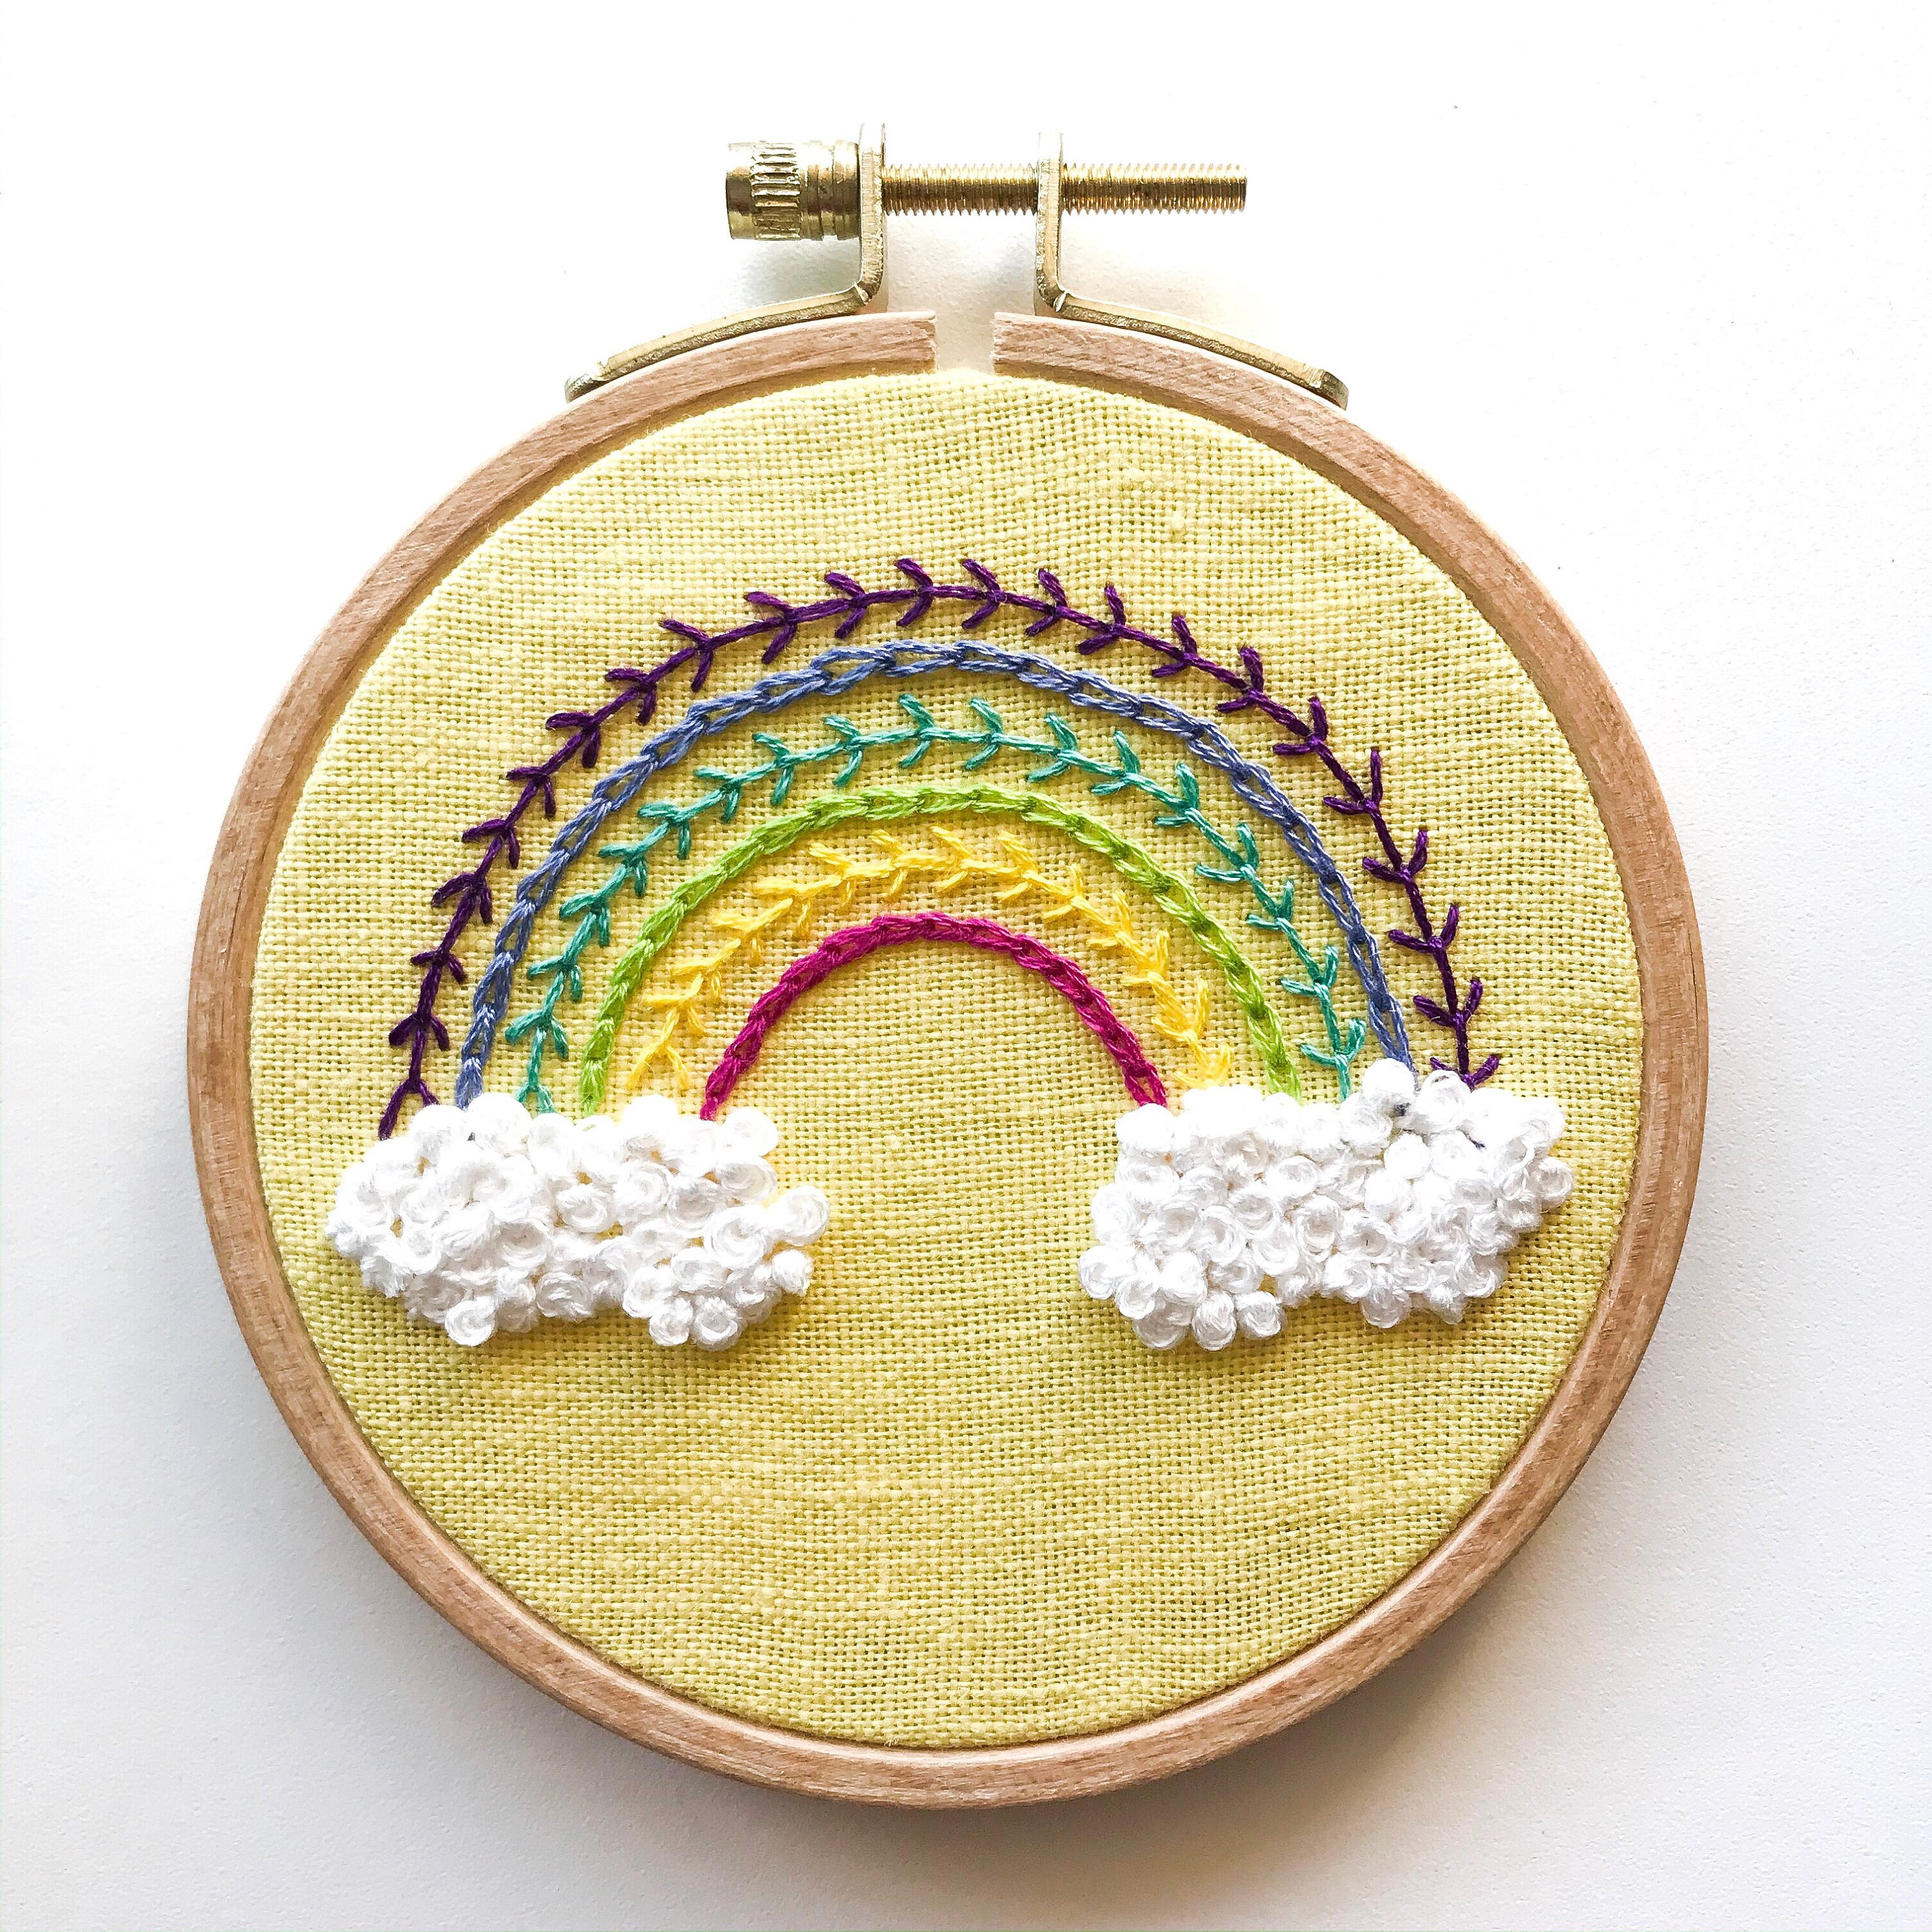 Rainbow Variegated Embroidery Floss – Muse of the Morning – Hand Dyed Embroidery  Floss & Fabric + PDF Embroidery Patterns